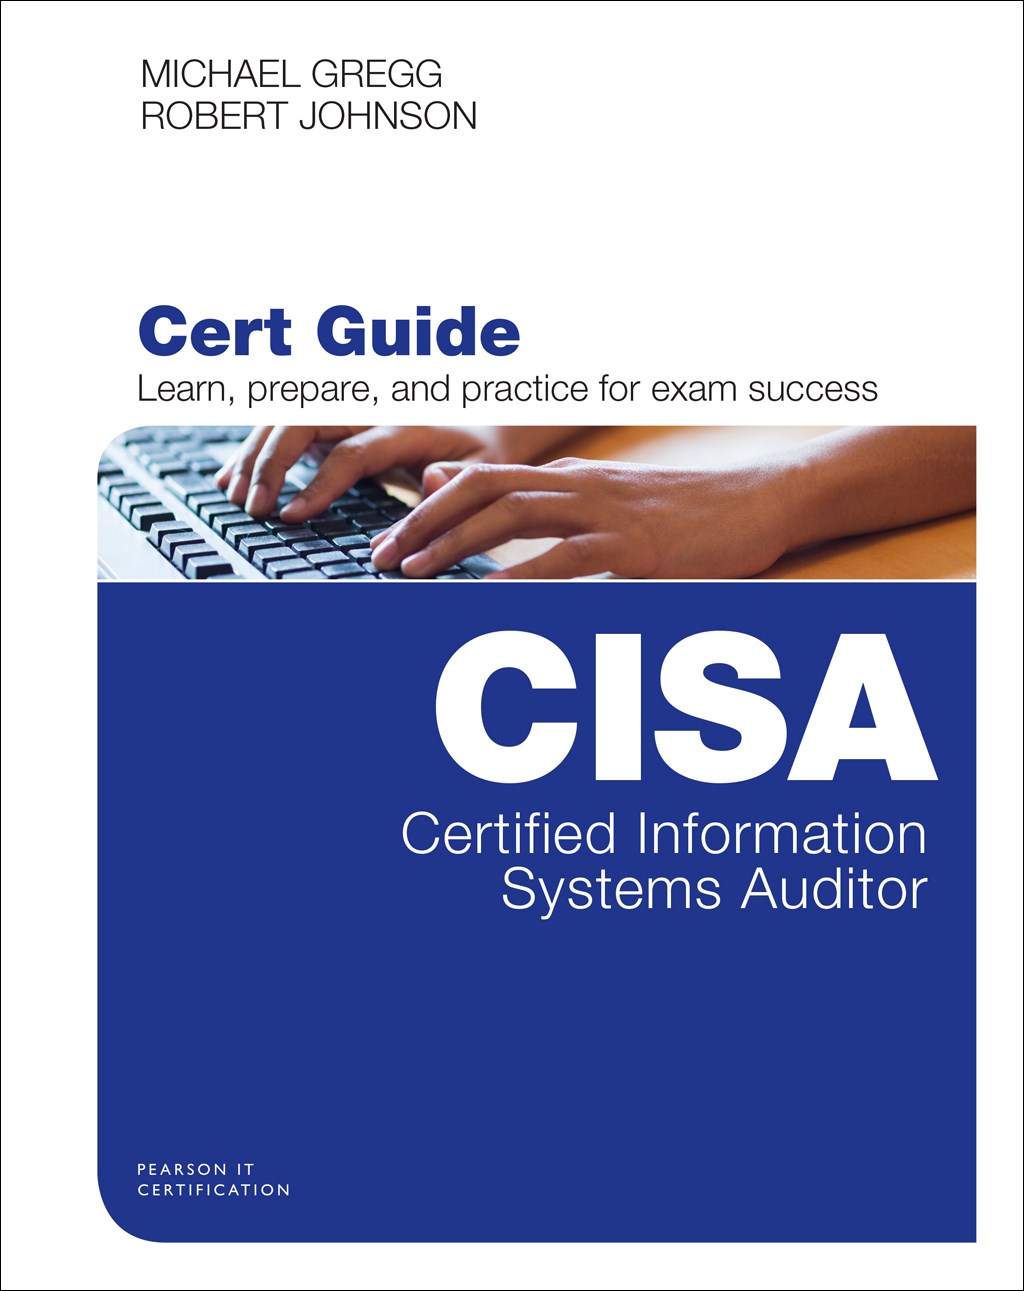 Certified Information Systems Auditor (CISA) Cert Guide